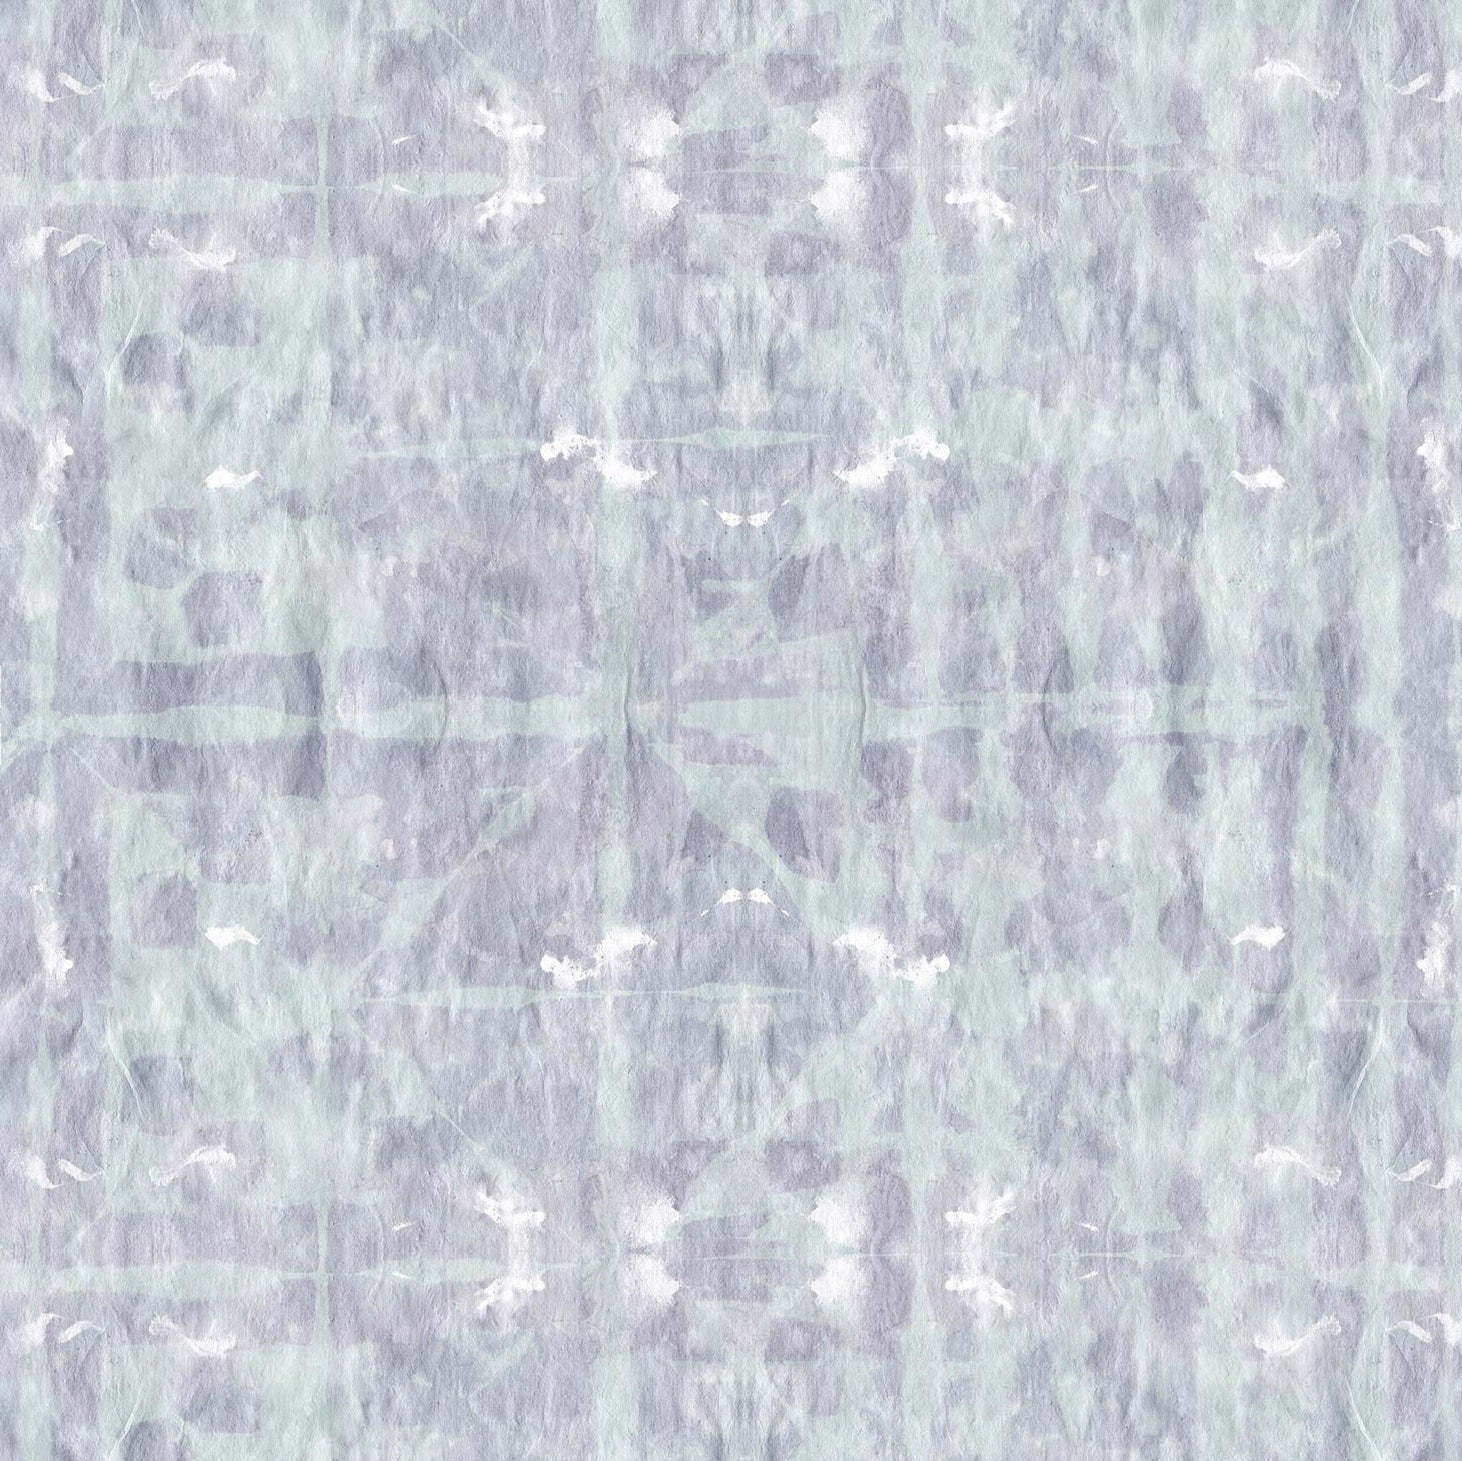 Detail of wallpaper in an abstract dyed grid print in mottled purple and turquoise.